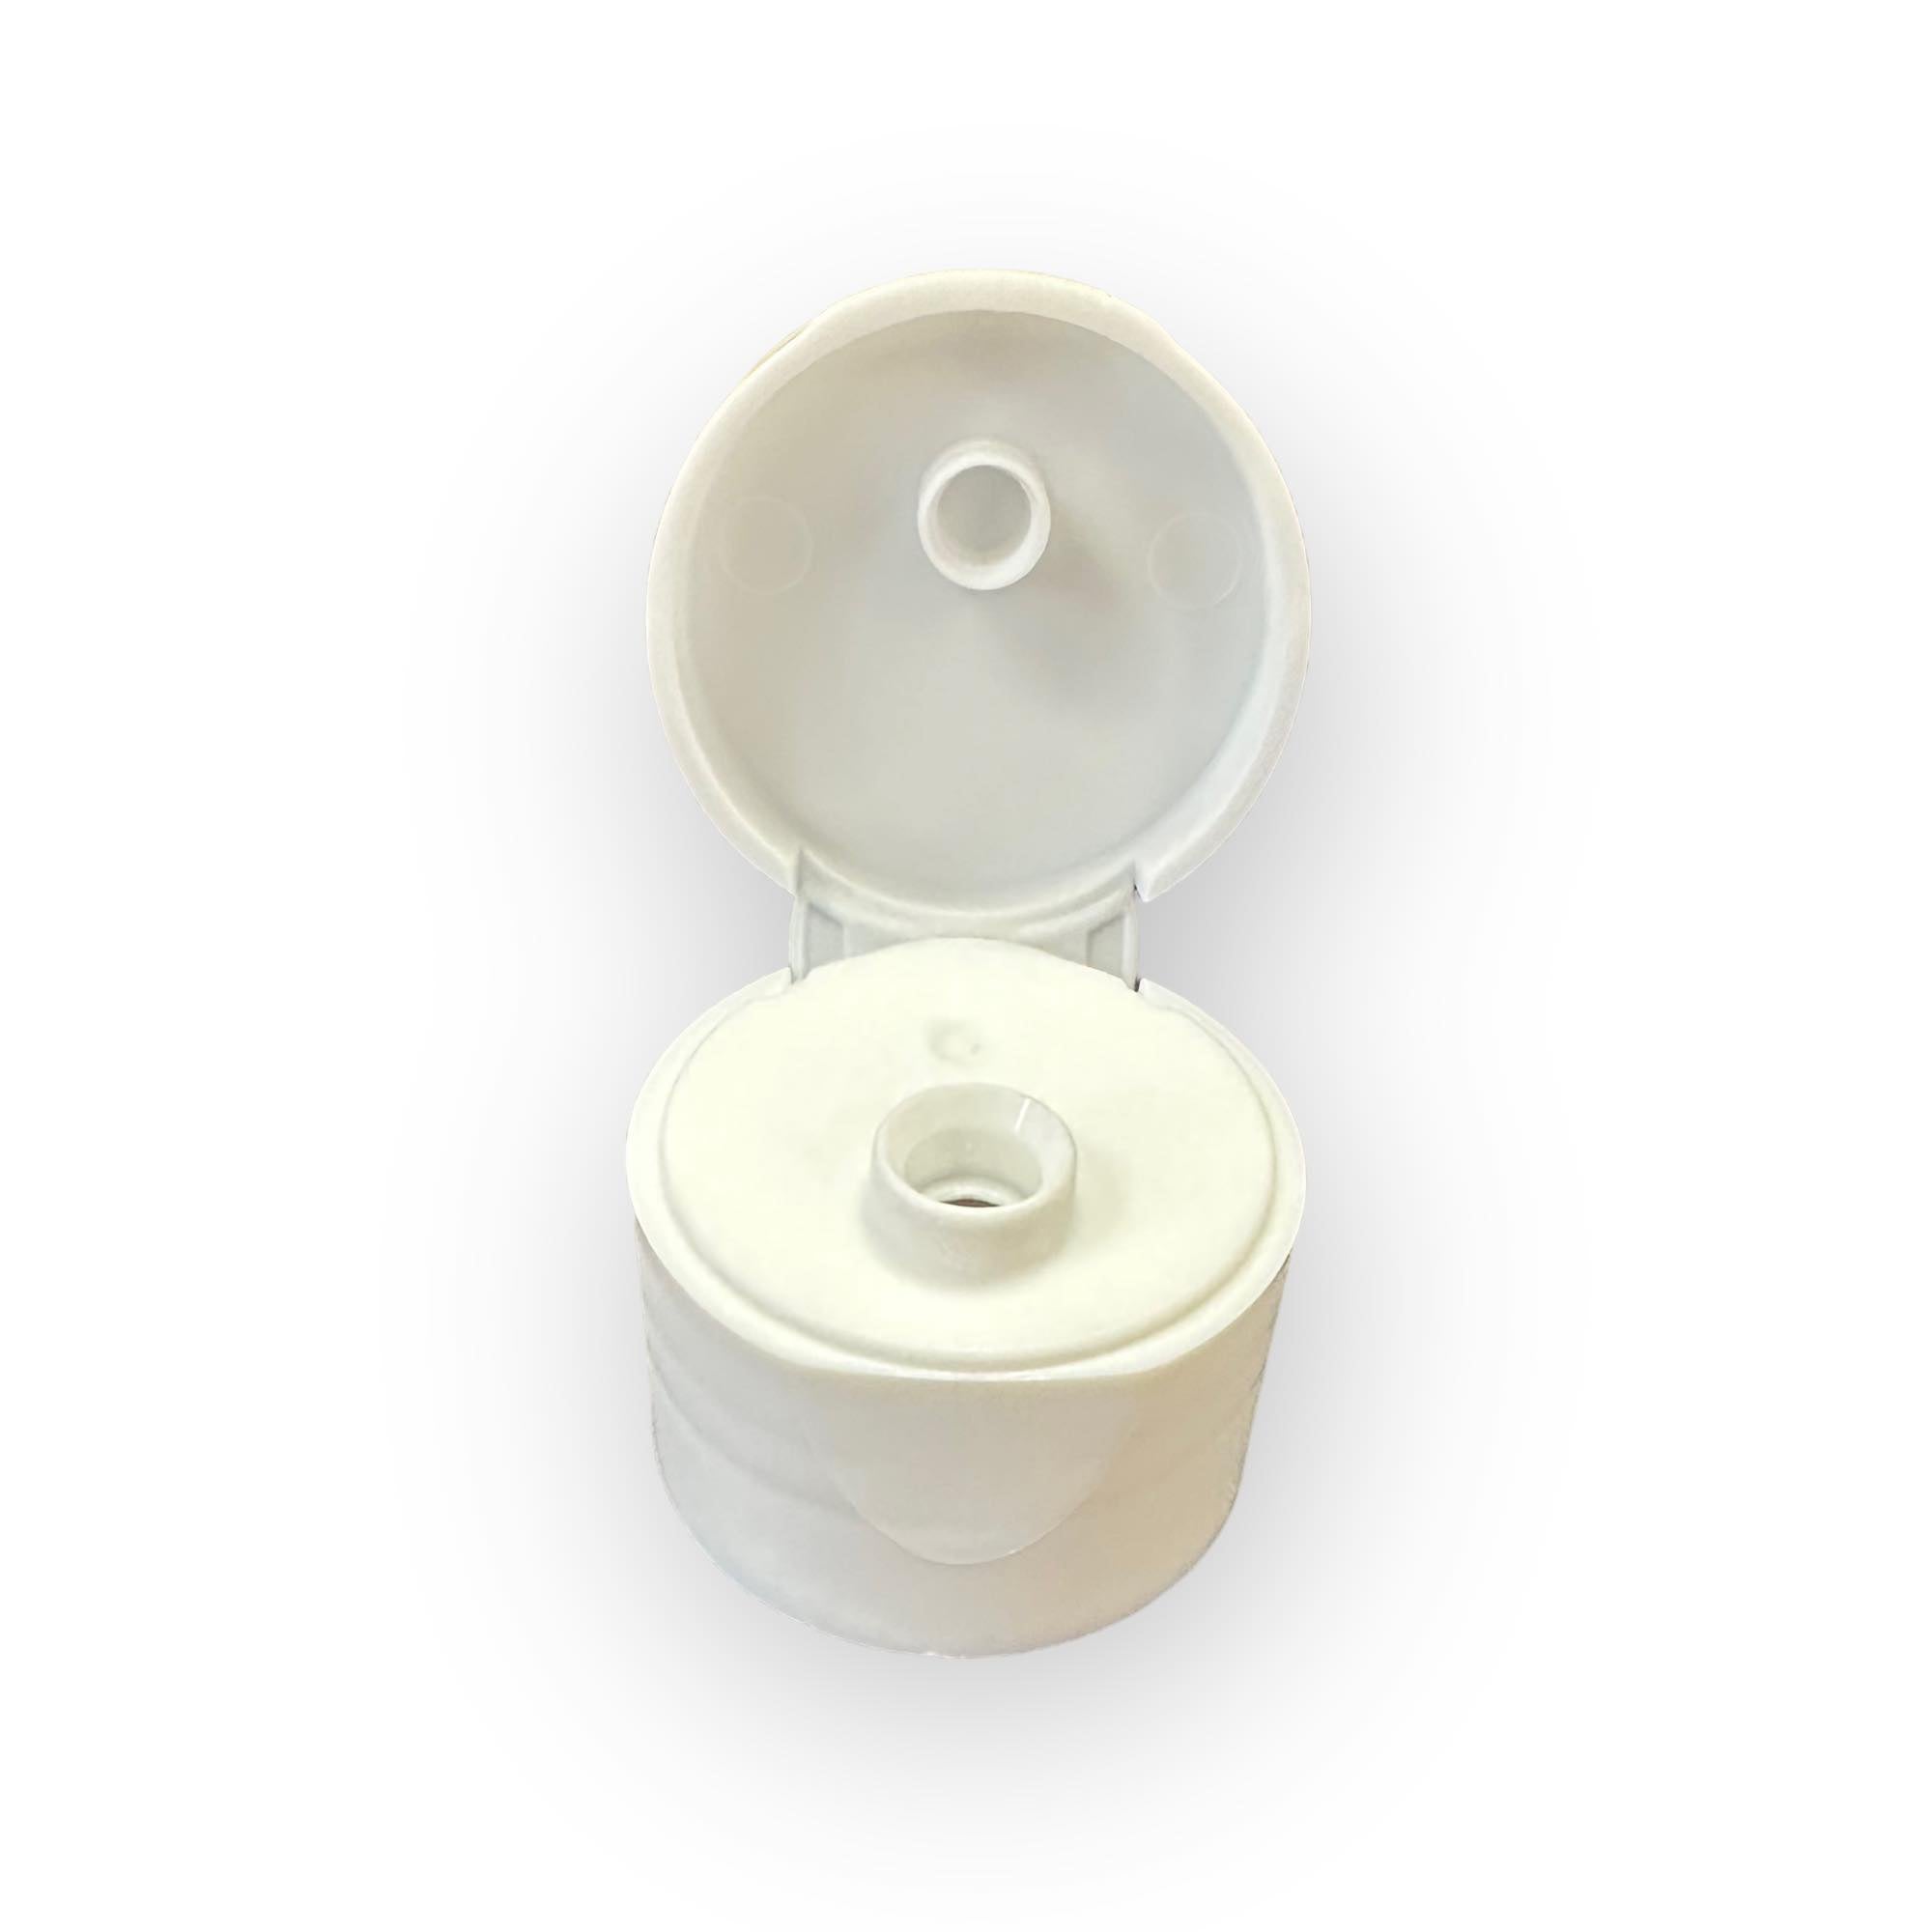 24mm White Flip Cap ( Fits Our 100ml And 250ml Bottles )